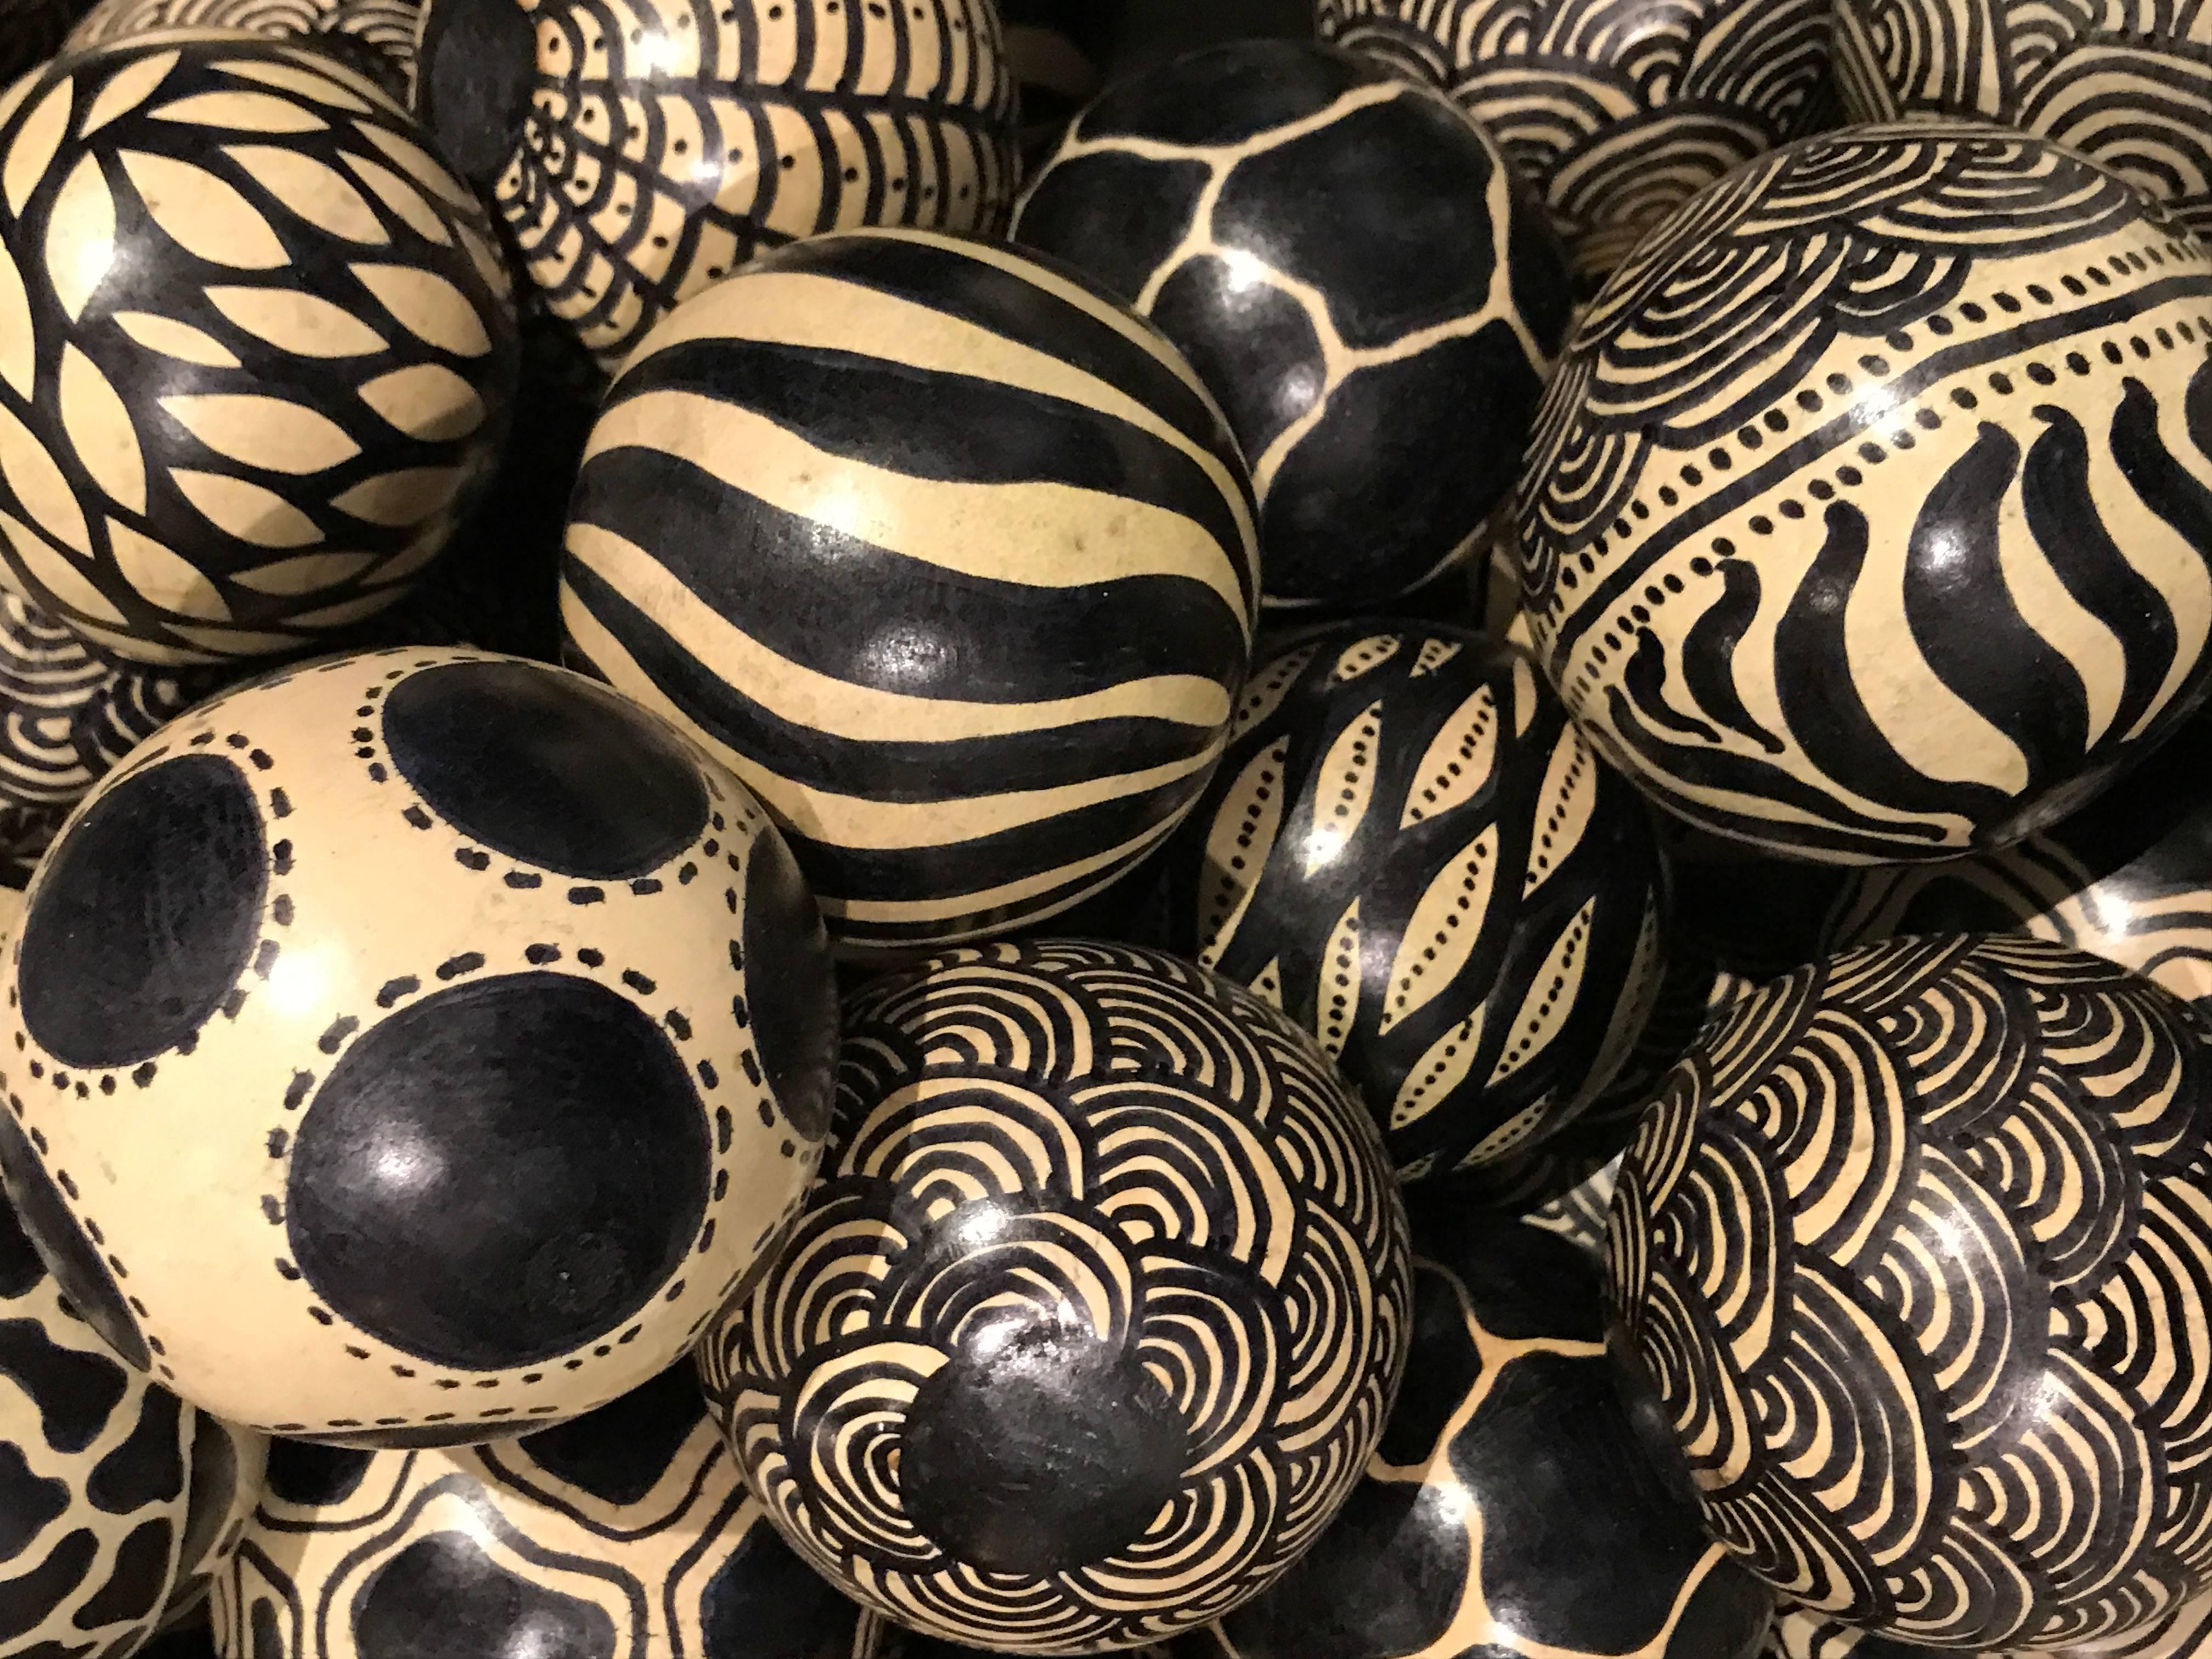 Contemporary Zambian hand-painted monkey oranges by villagers in Zambia.
Black and cream in coloration.
Several different designs.
Sizes are 2.5